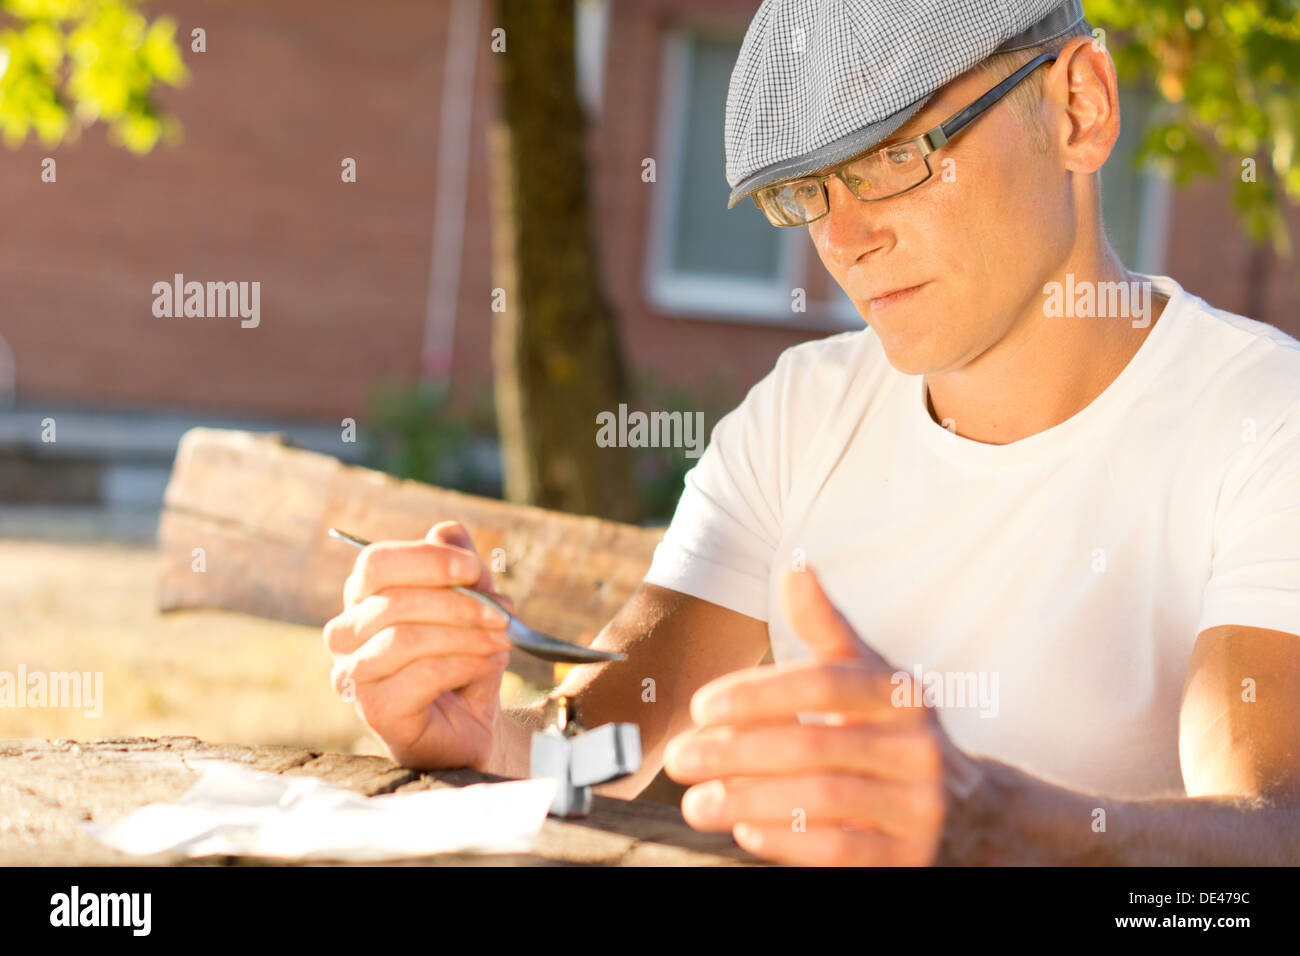 Caucasian middle-aged drug user preparing a dose of heroin for an intravenous injection Stock Photo